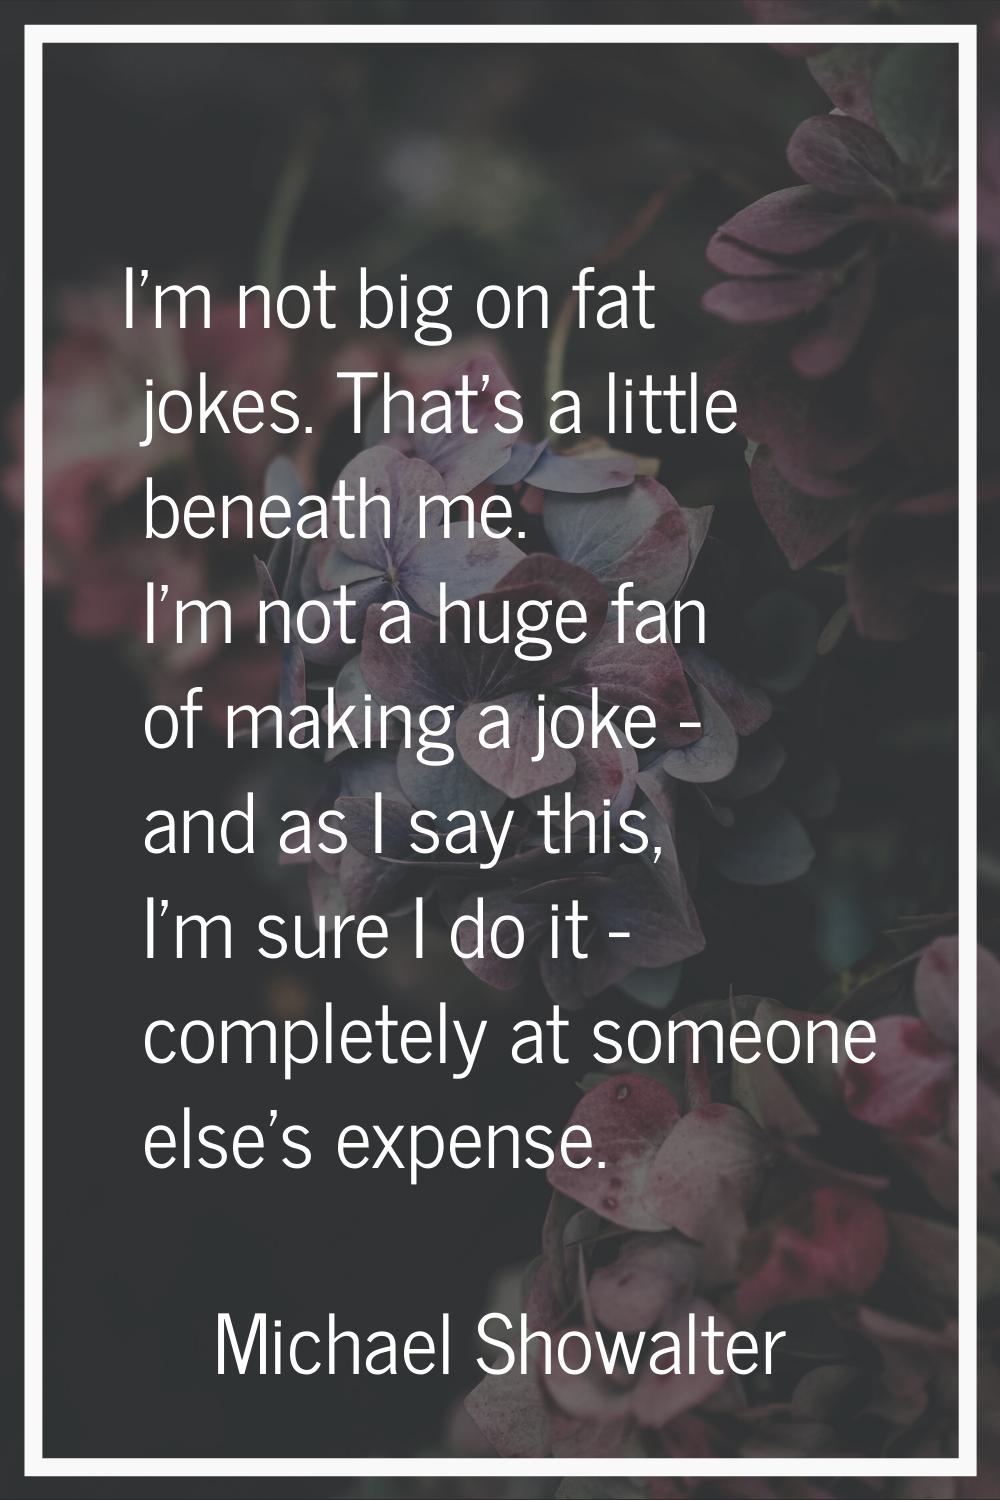 I'm not big on fat jokes. That's a little beneath me. I'm not a huge fan of making a joke - and as 